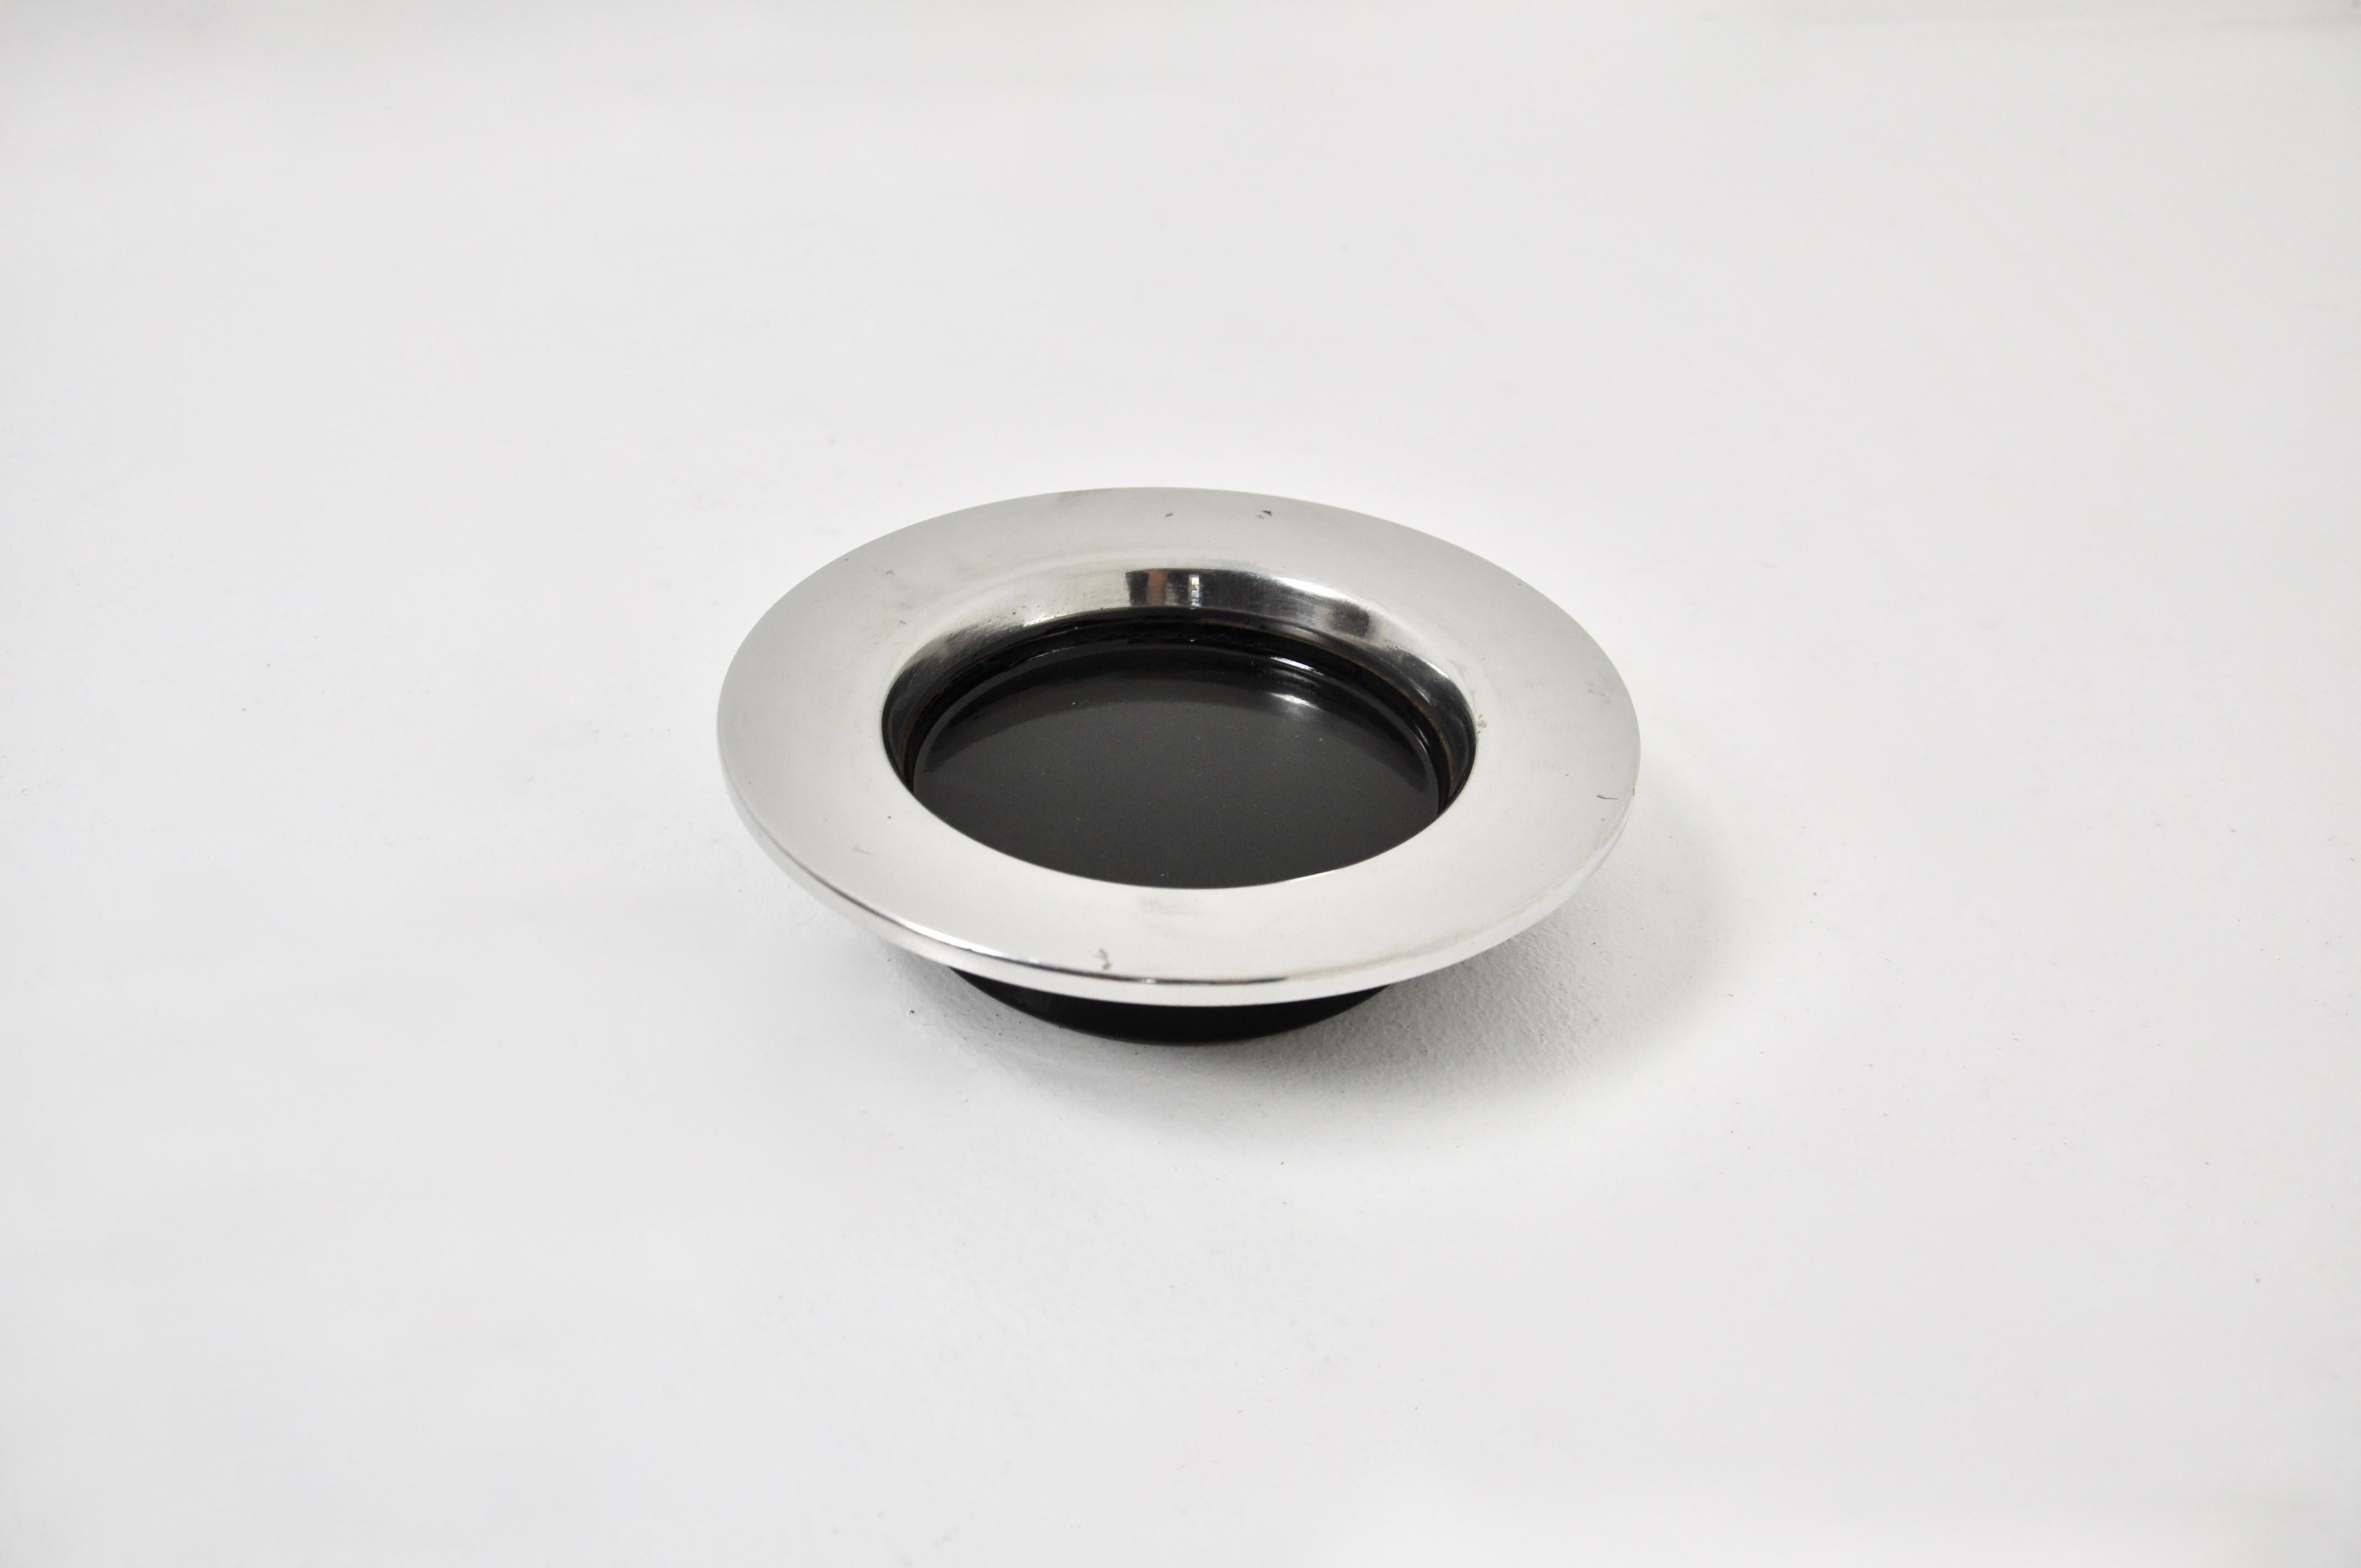 Black plastic and chromed metal ashtray. Stamped on the bottom. Wear due to time and age of the ashtray.